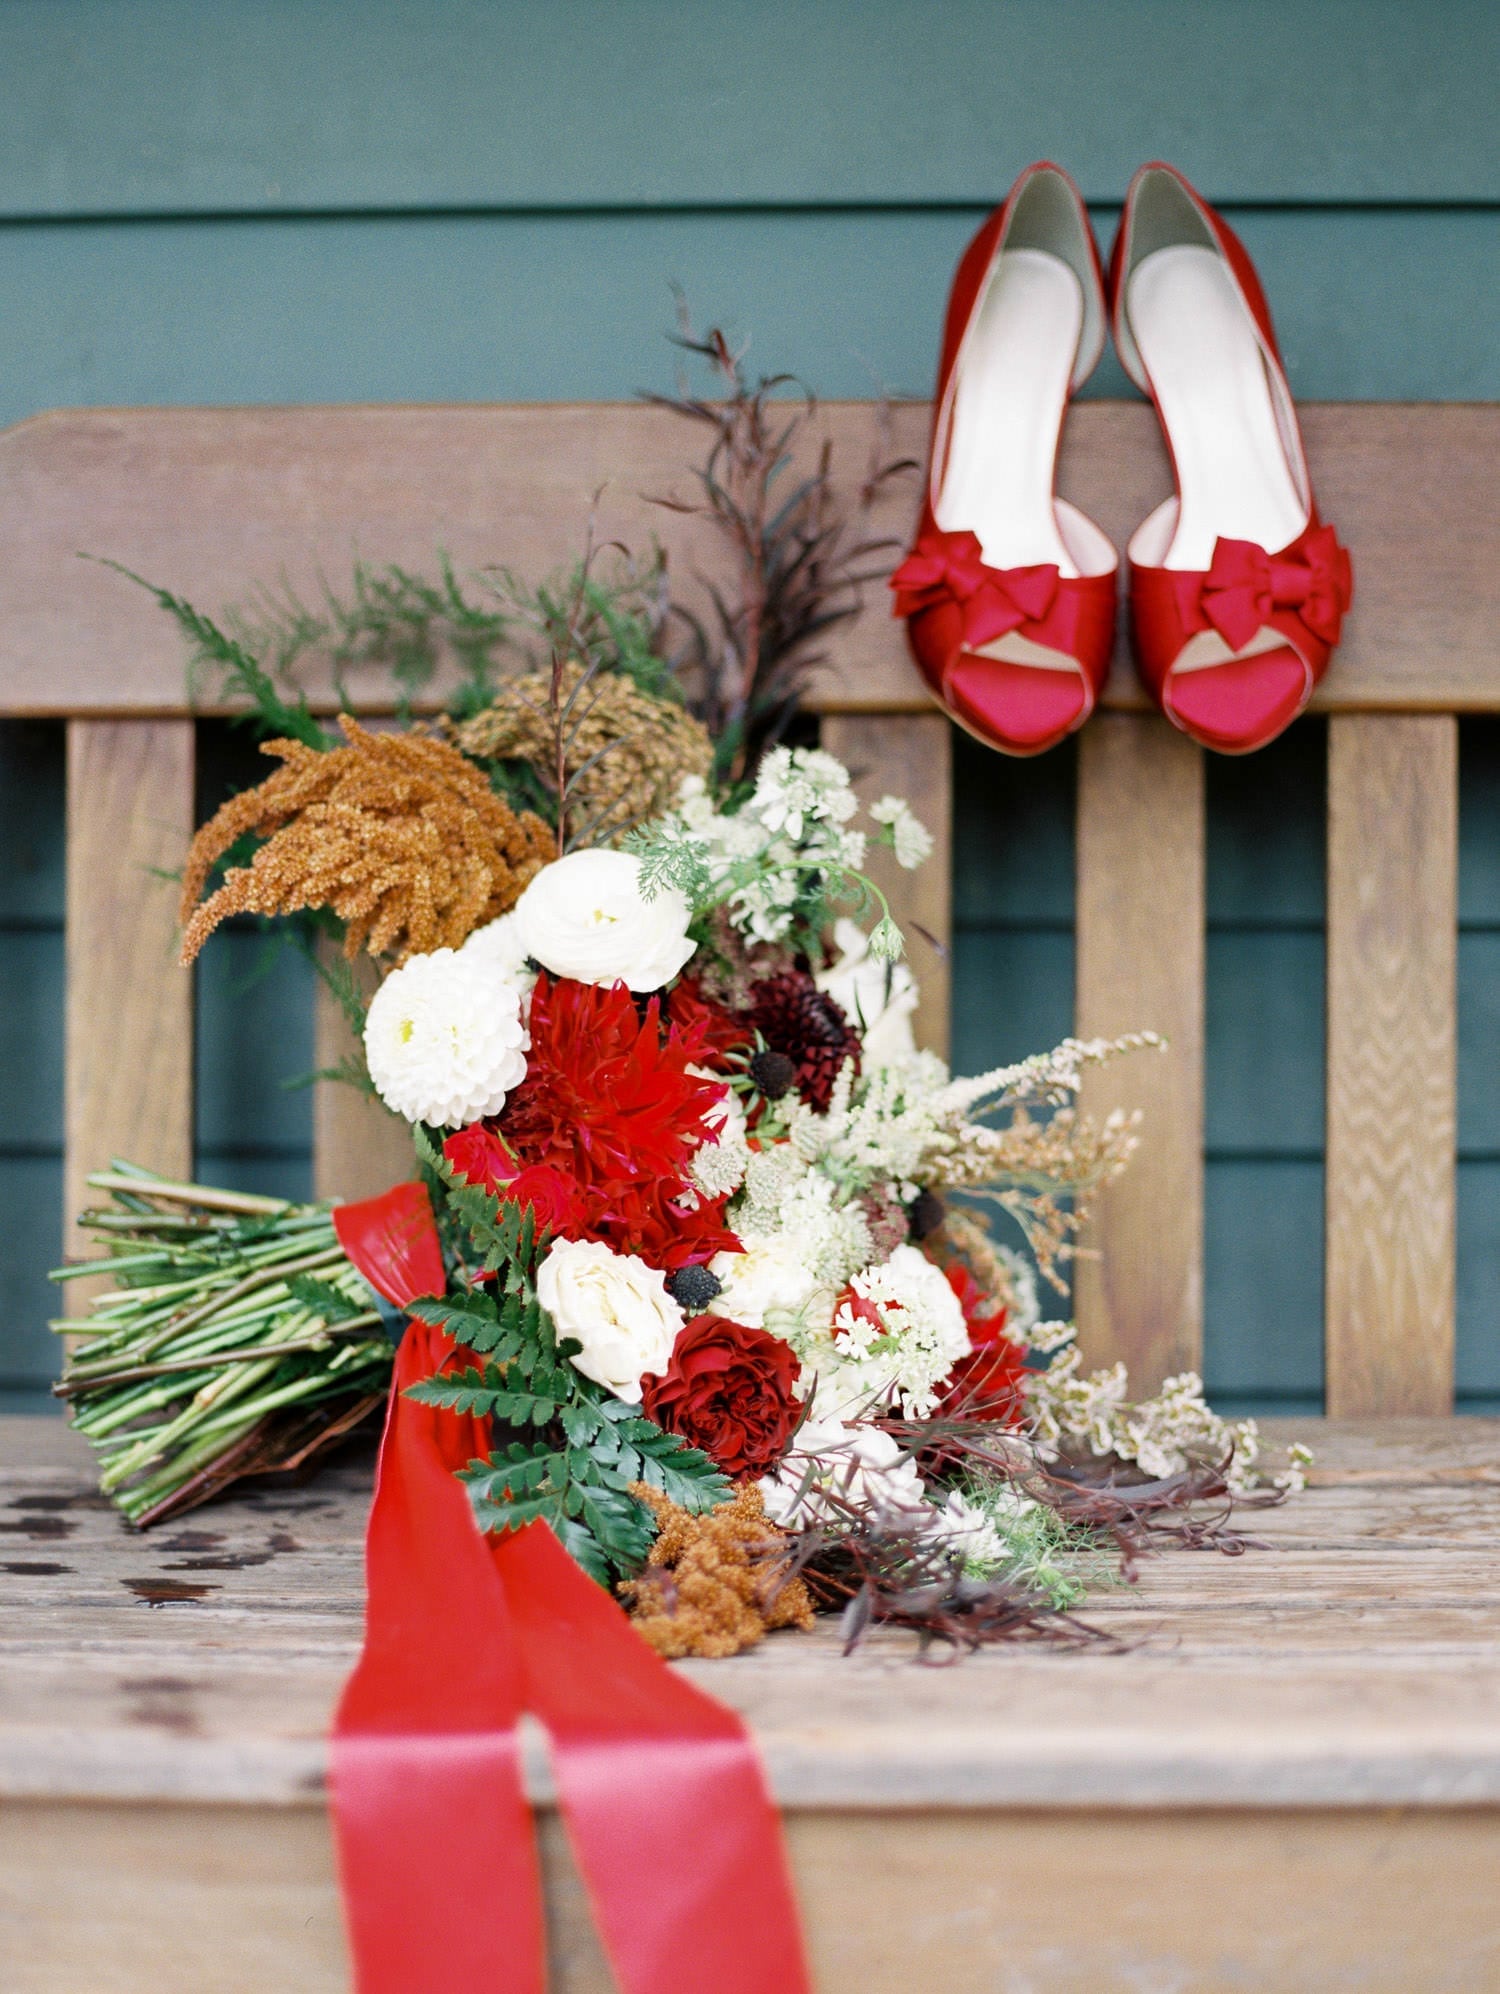 Wedding shoes and bouquet rustic style | Vancouver wedding photographer